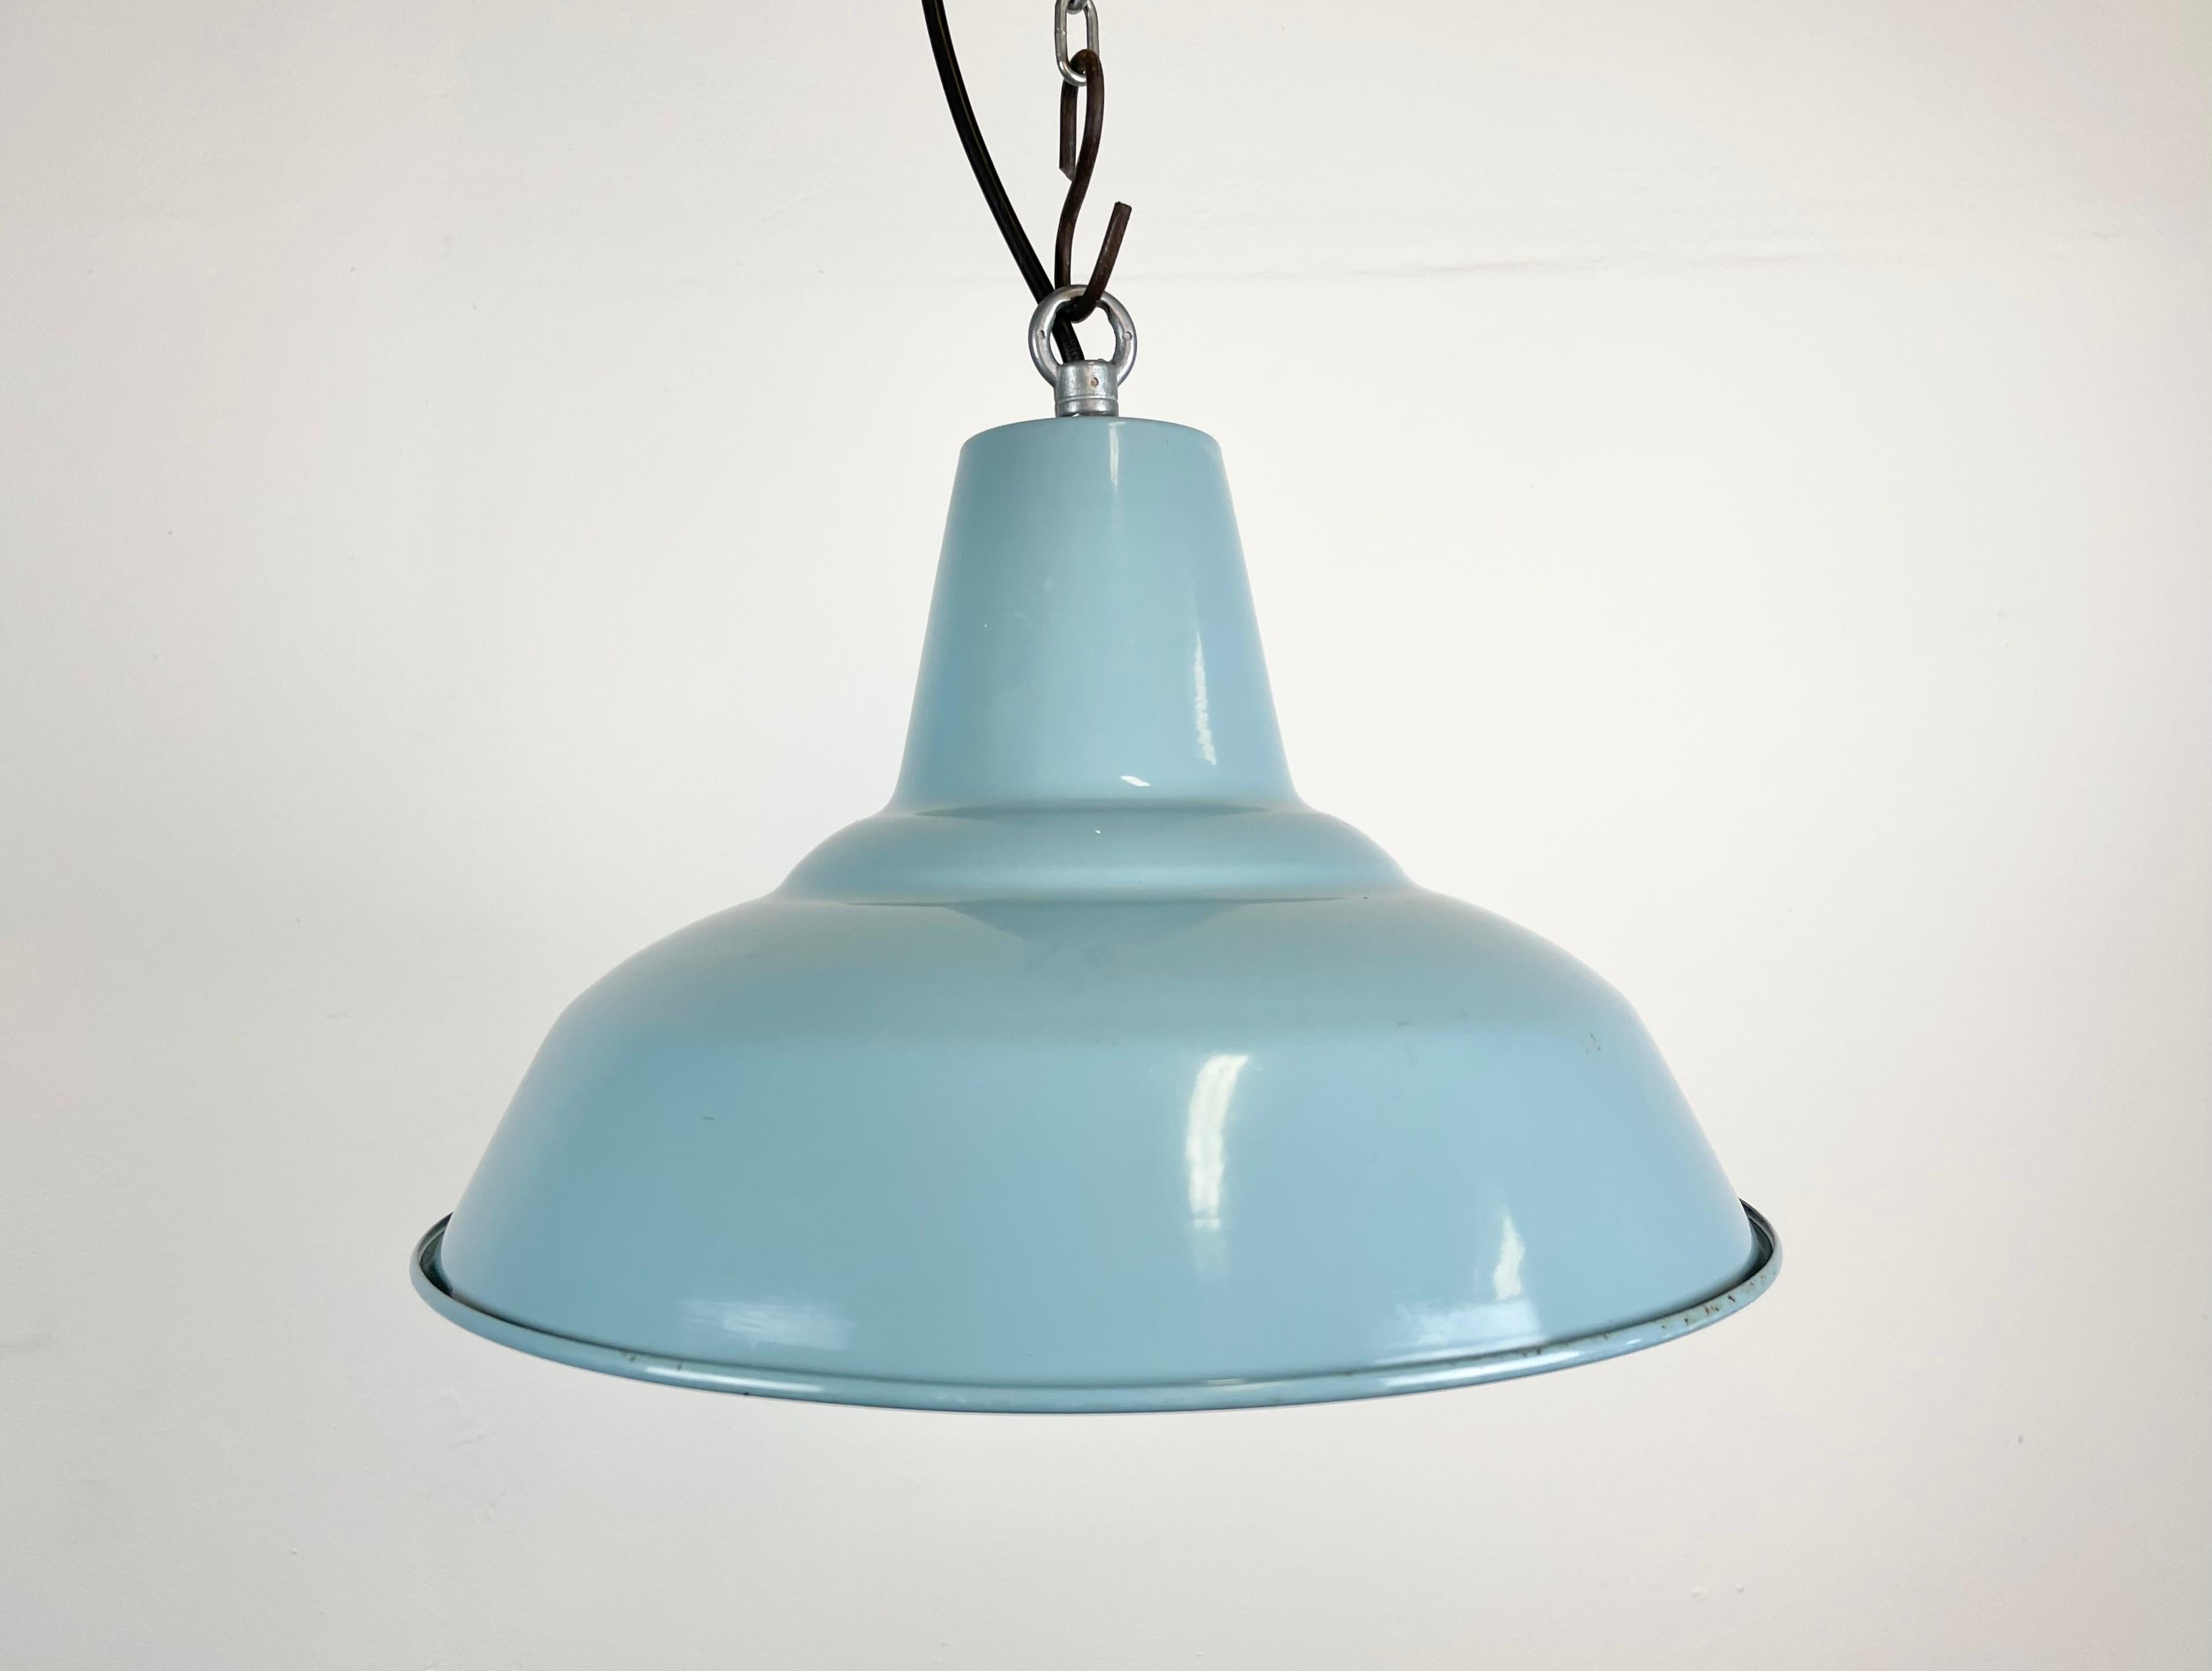 Vintage industrial lamp made during the 1960s. It features a light blue enamel shade with white enamel interior and iron top. New porcelain socket requires E 27 light bulbs. New wire. The weight of the lamp is 0,6 kg.